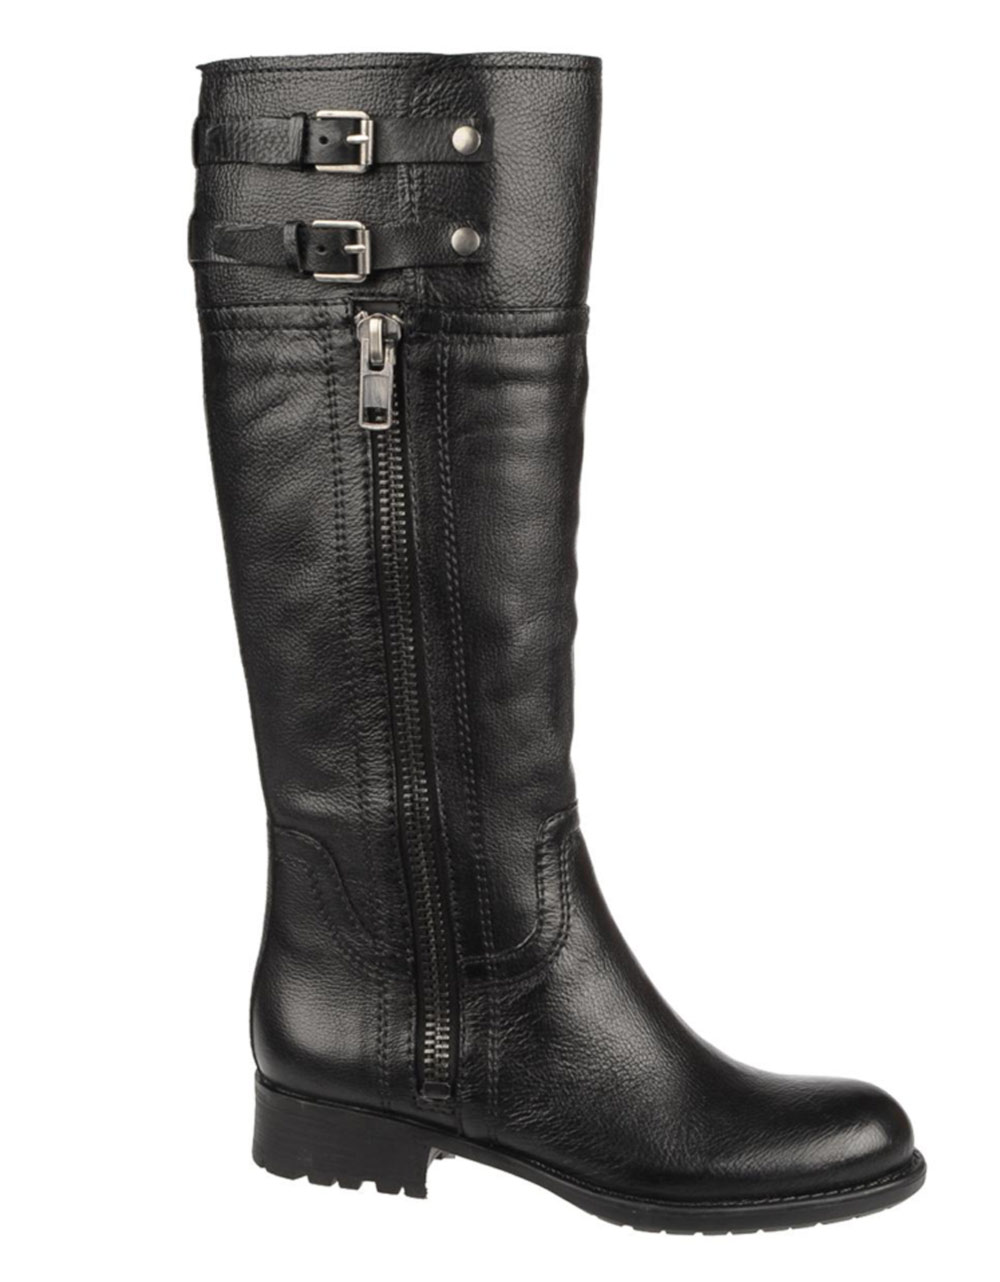 Lyst - Franco sarto Poet Tall Leather Riding Boots in Black